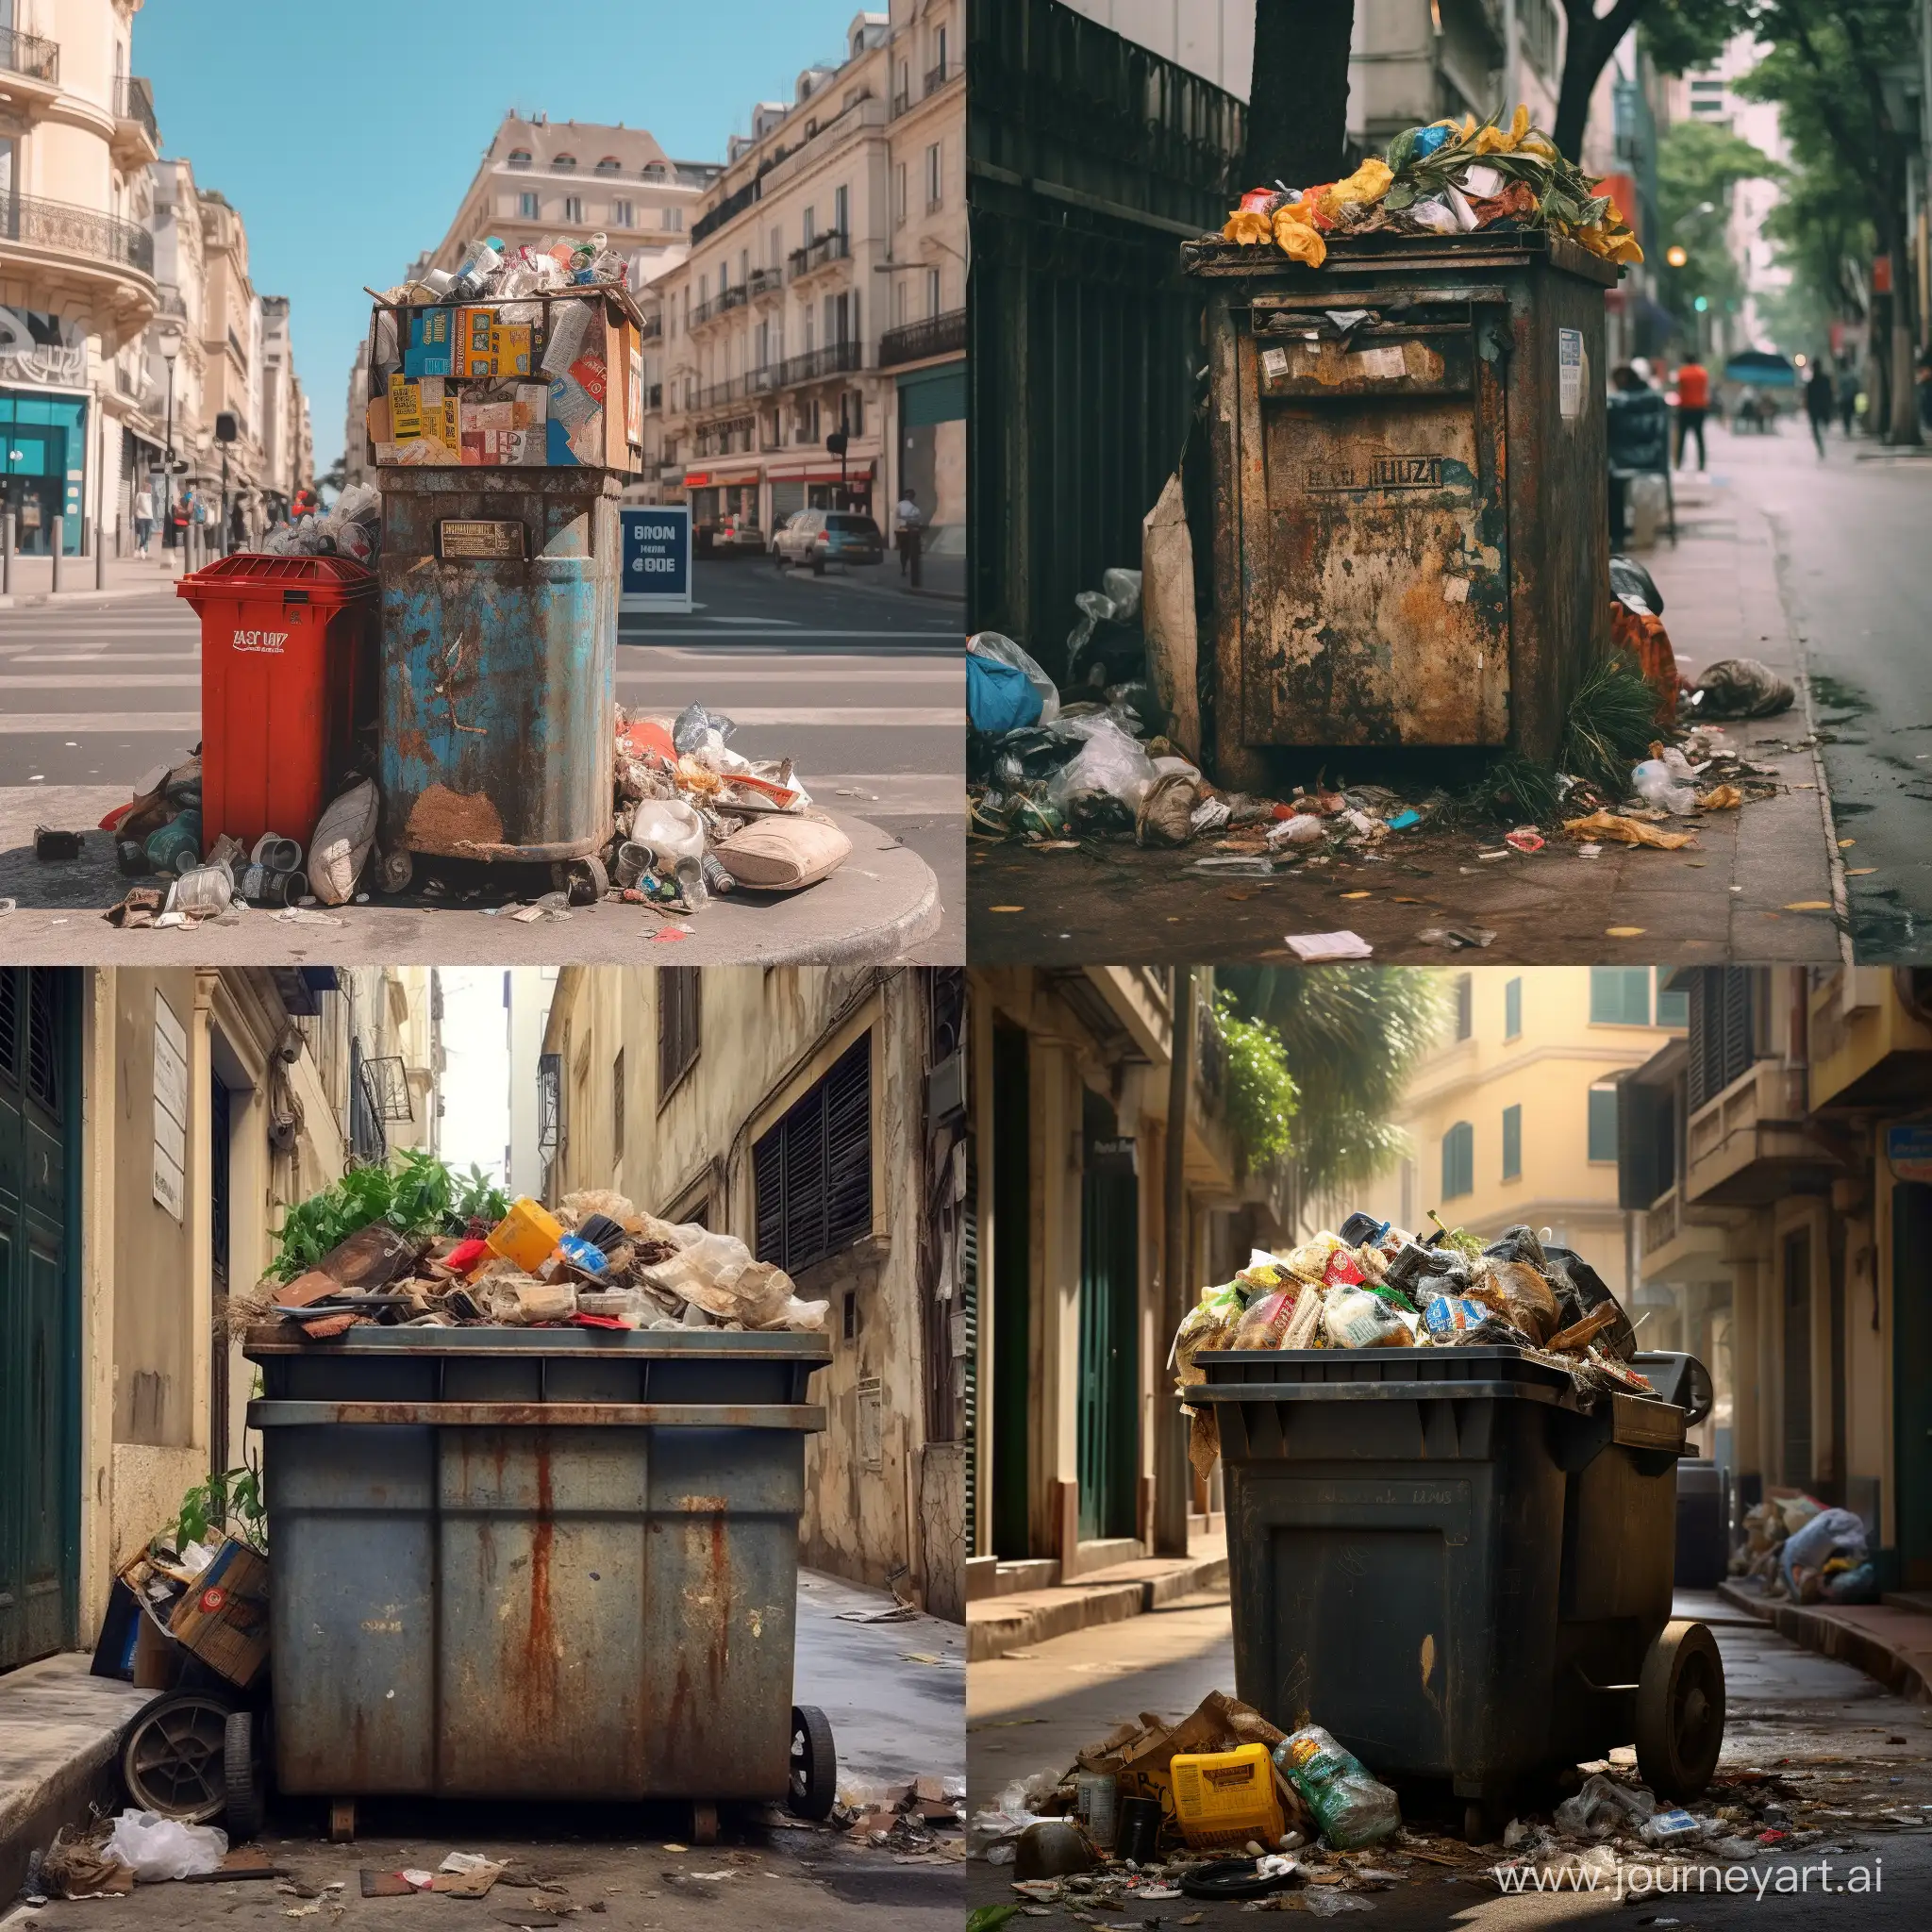 Urban-Decay-Neglected-Garbage-Container-in-a-Picturesque-Street